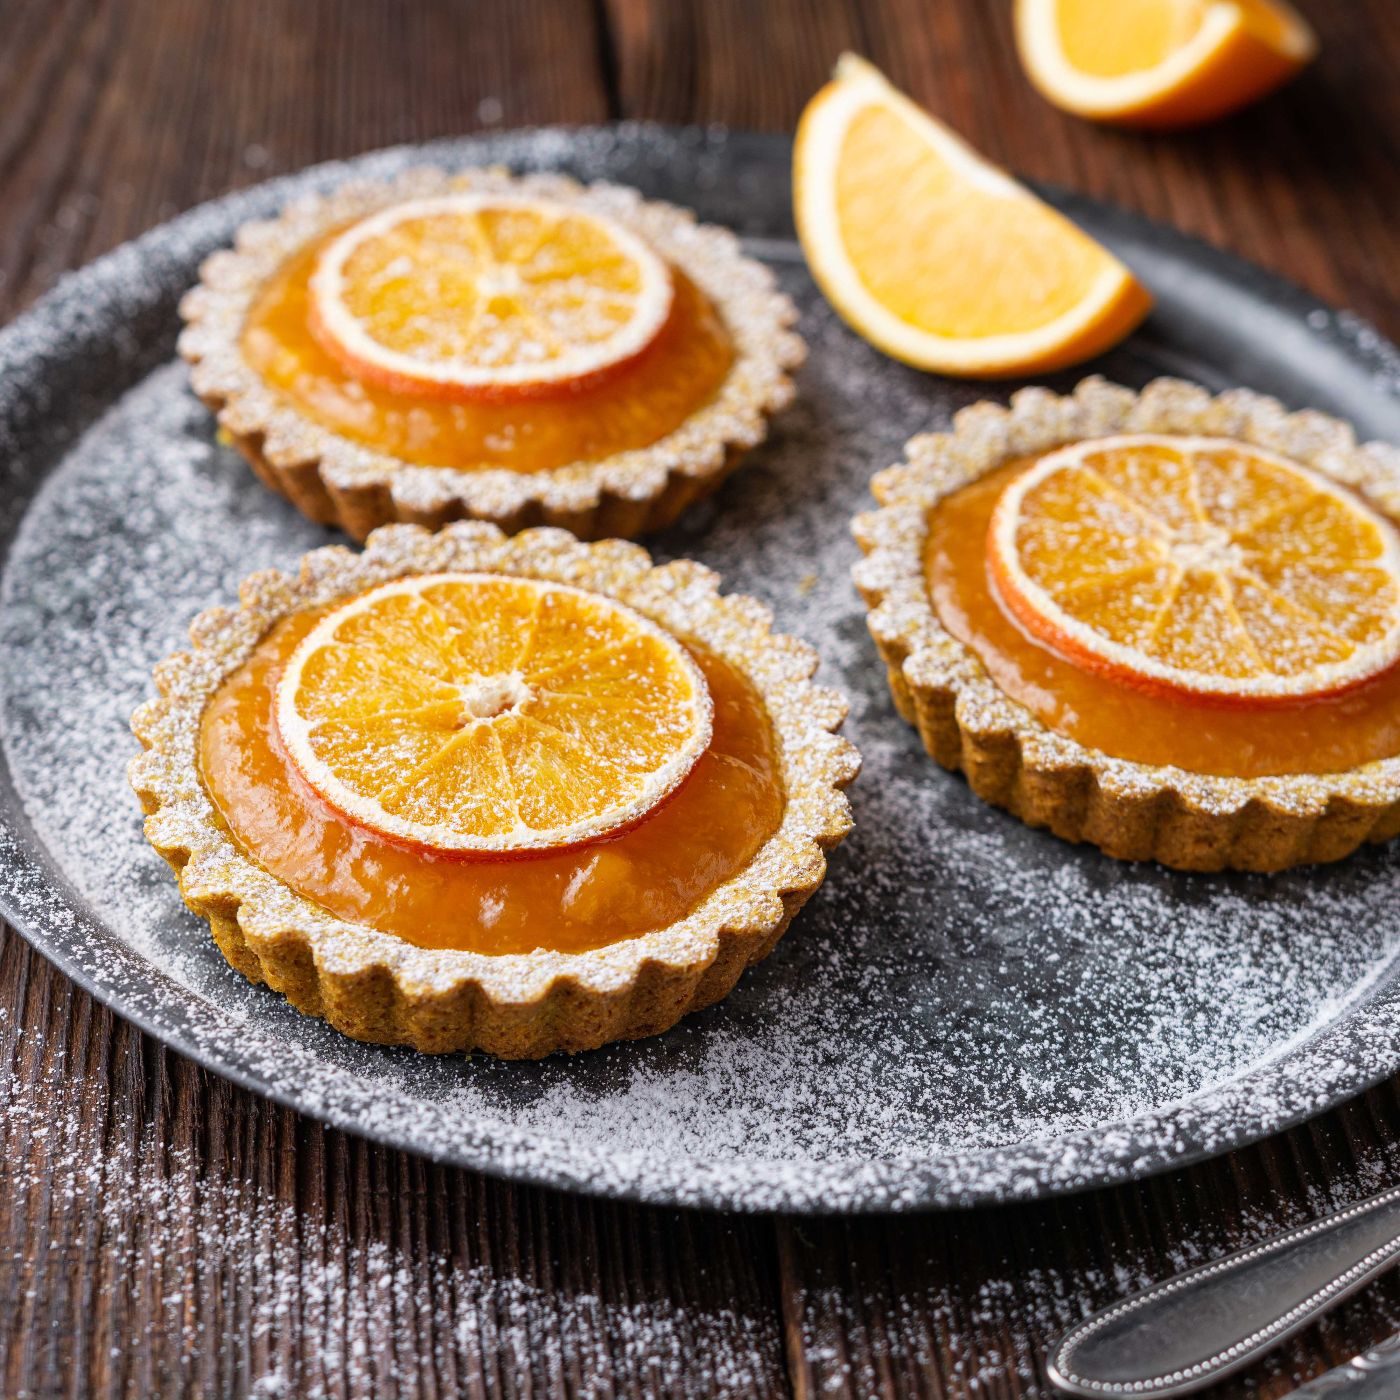 Whole-wheat-turmeric-tartlets-filled-with-apricot-jam,-decorated-with-dried-oranges,-topped-with-powdered-sugar-1194762437_6000x4000 aquare.jpeg